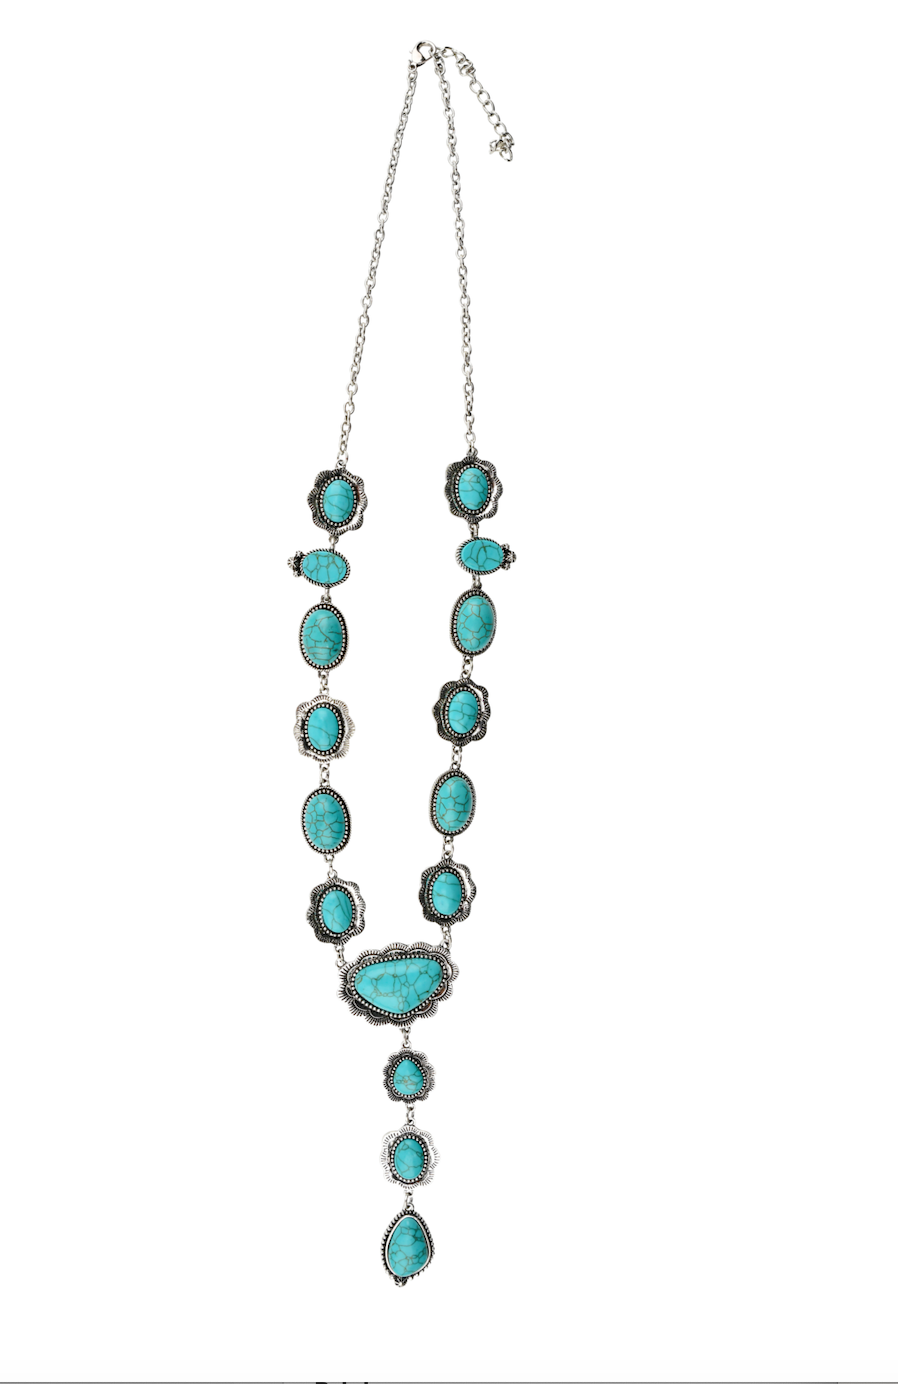 24" Turquoise Lariat Style Necklace with 3.5" Tail